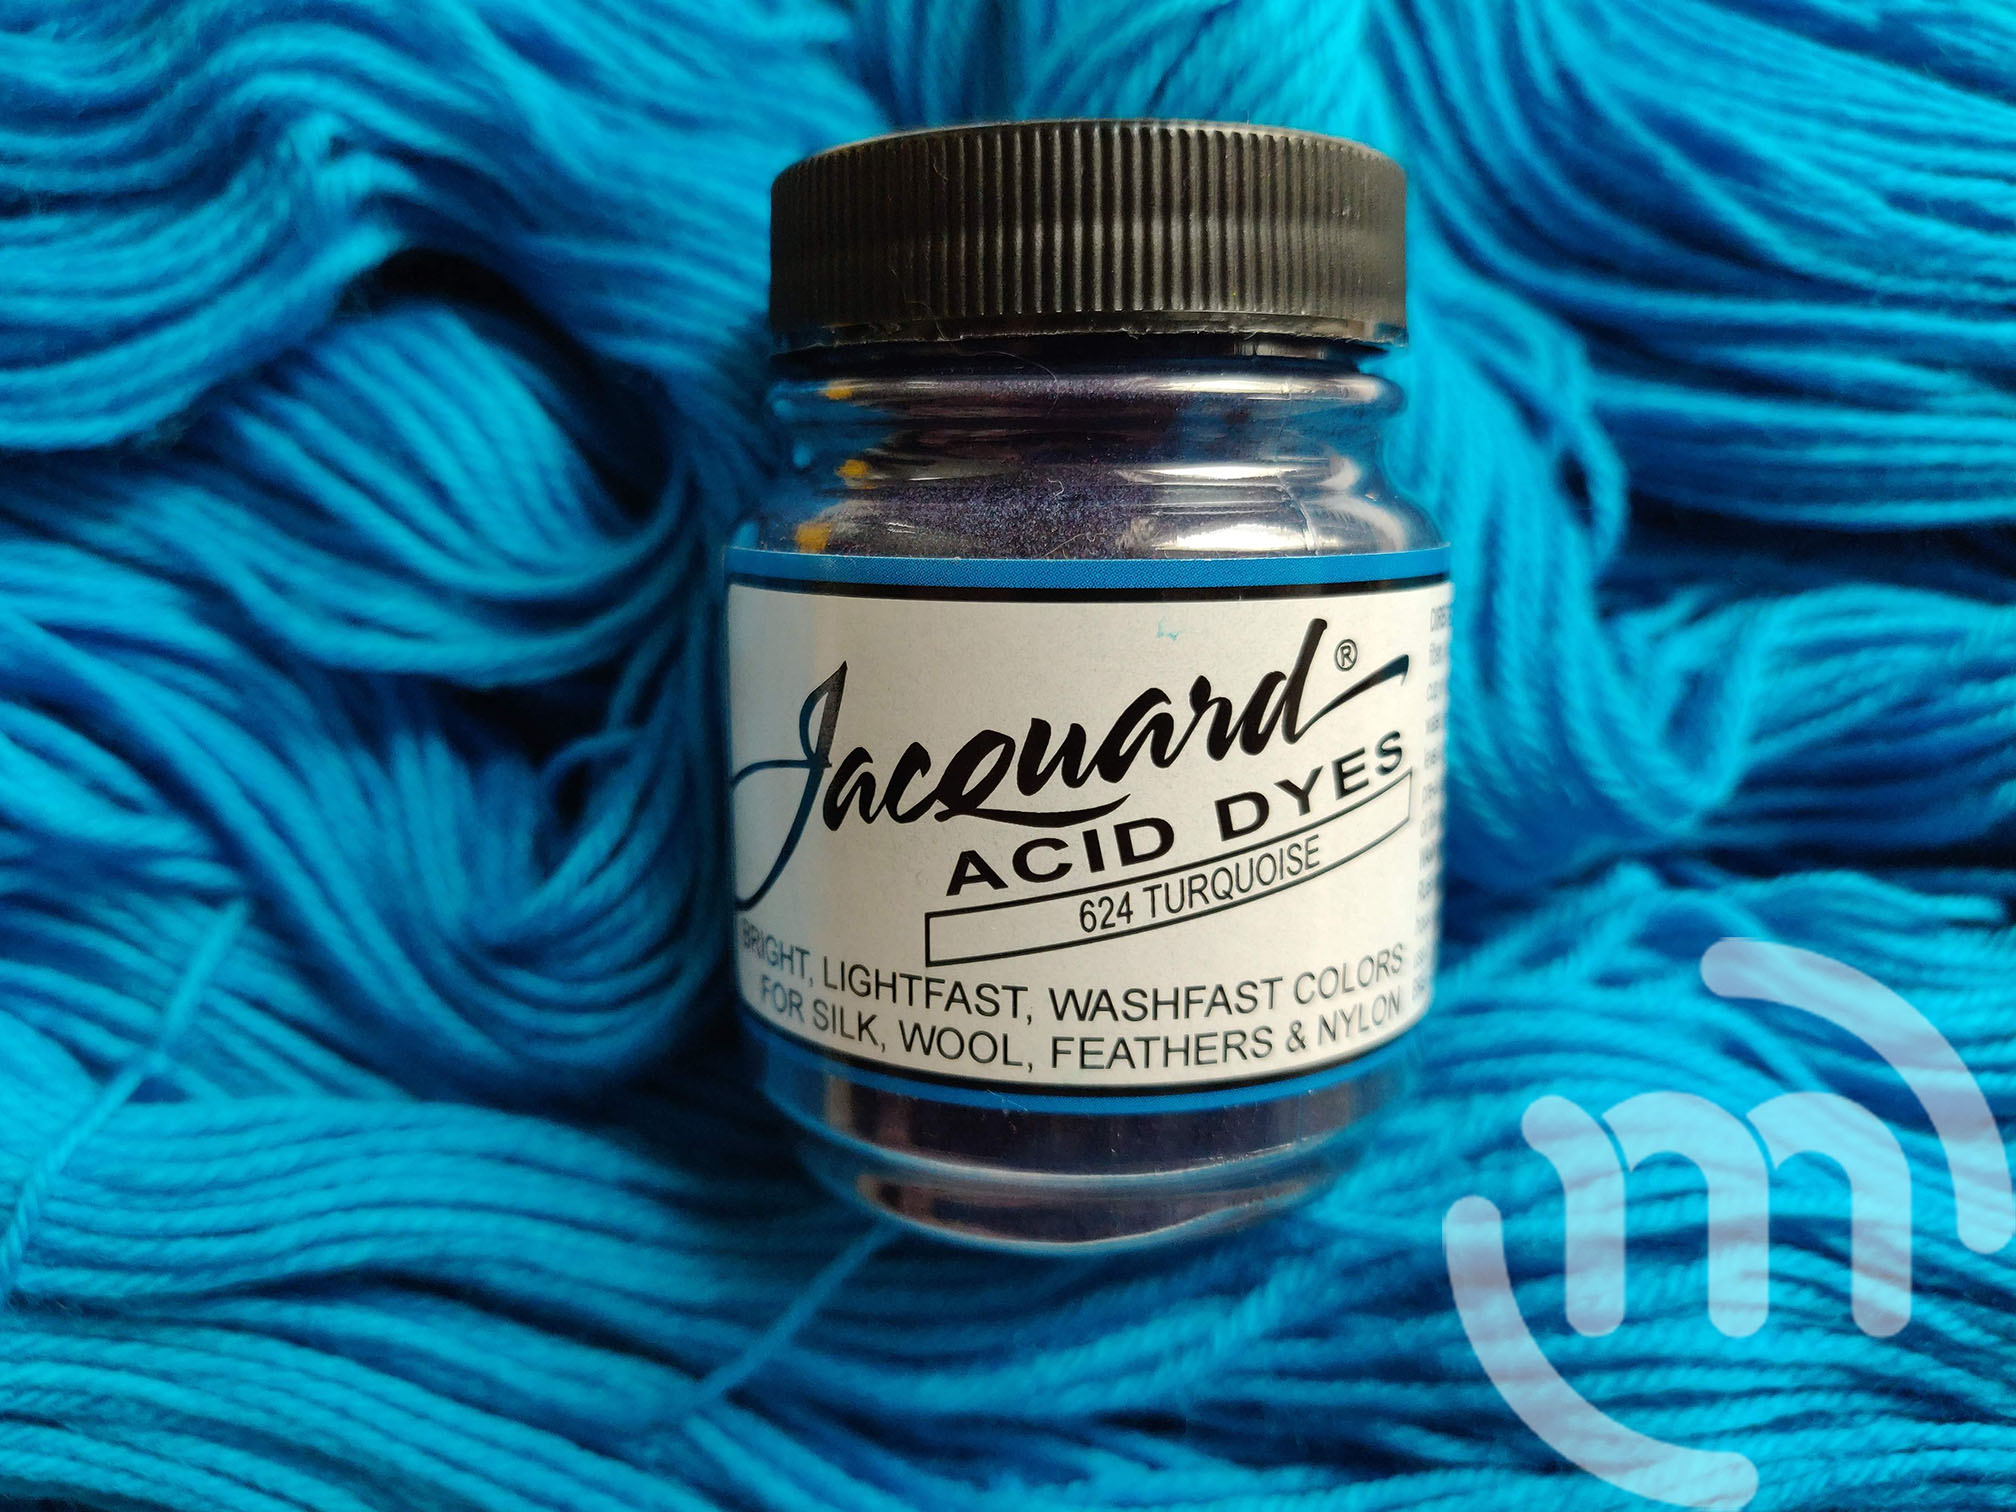 Dyeing Yarn with Jacquard Acid Dyes: Turquoise